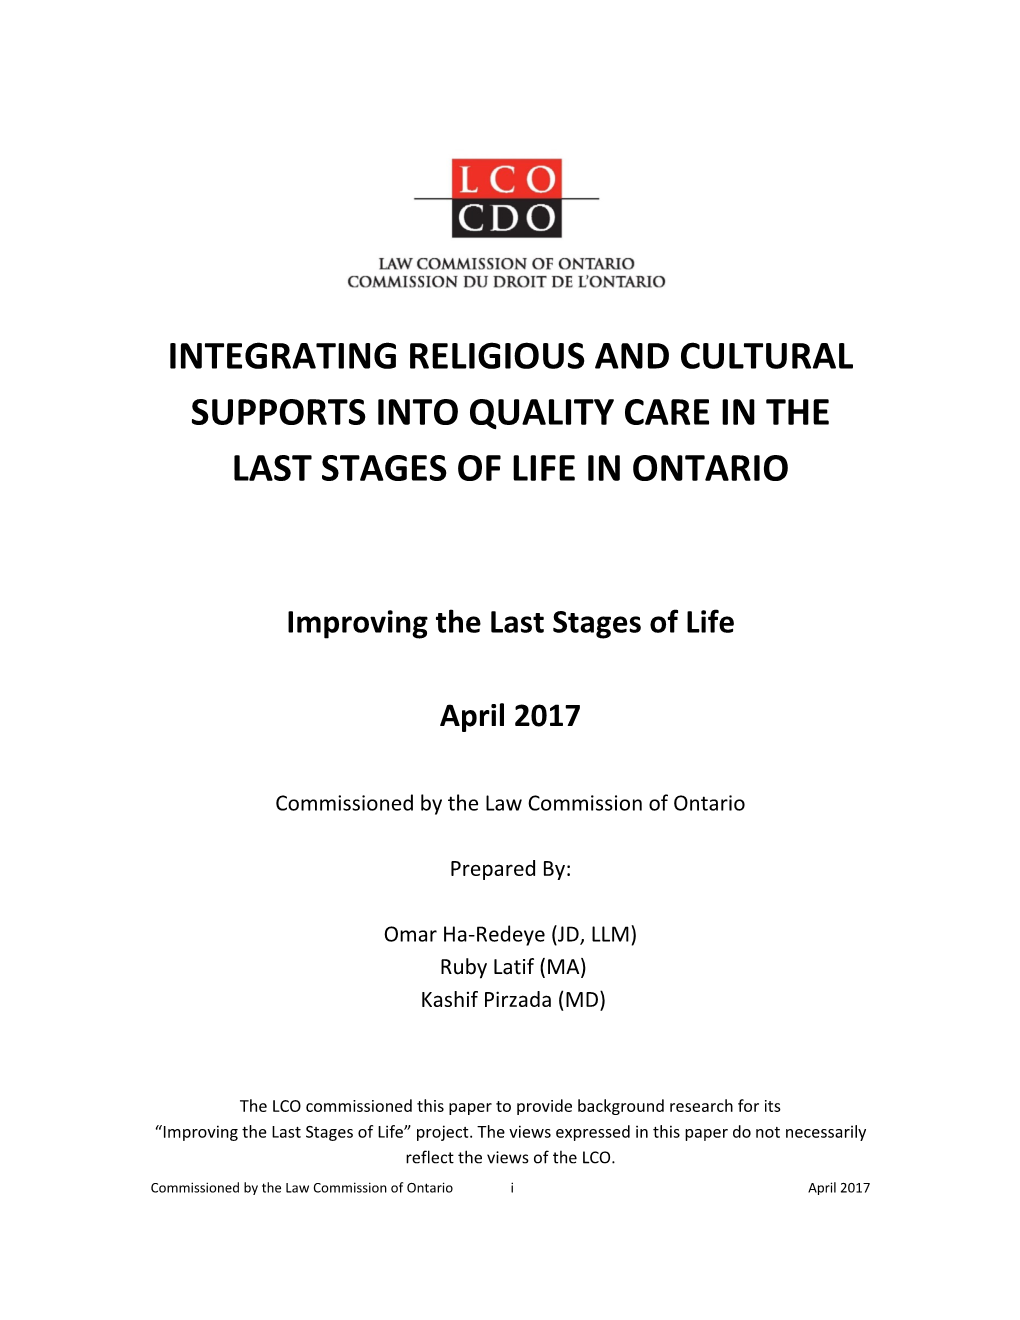 Integrating Religious and Cultural Supports Into Quality Care in the Last Stages of Life in Ontario